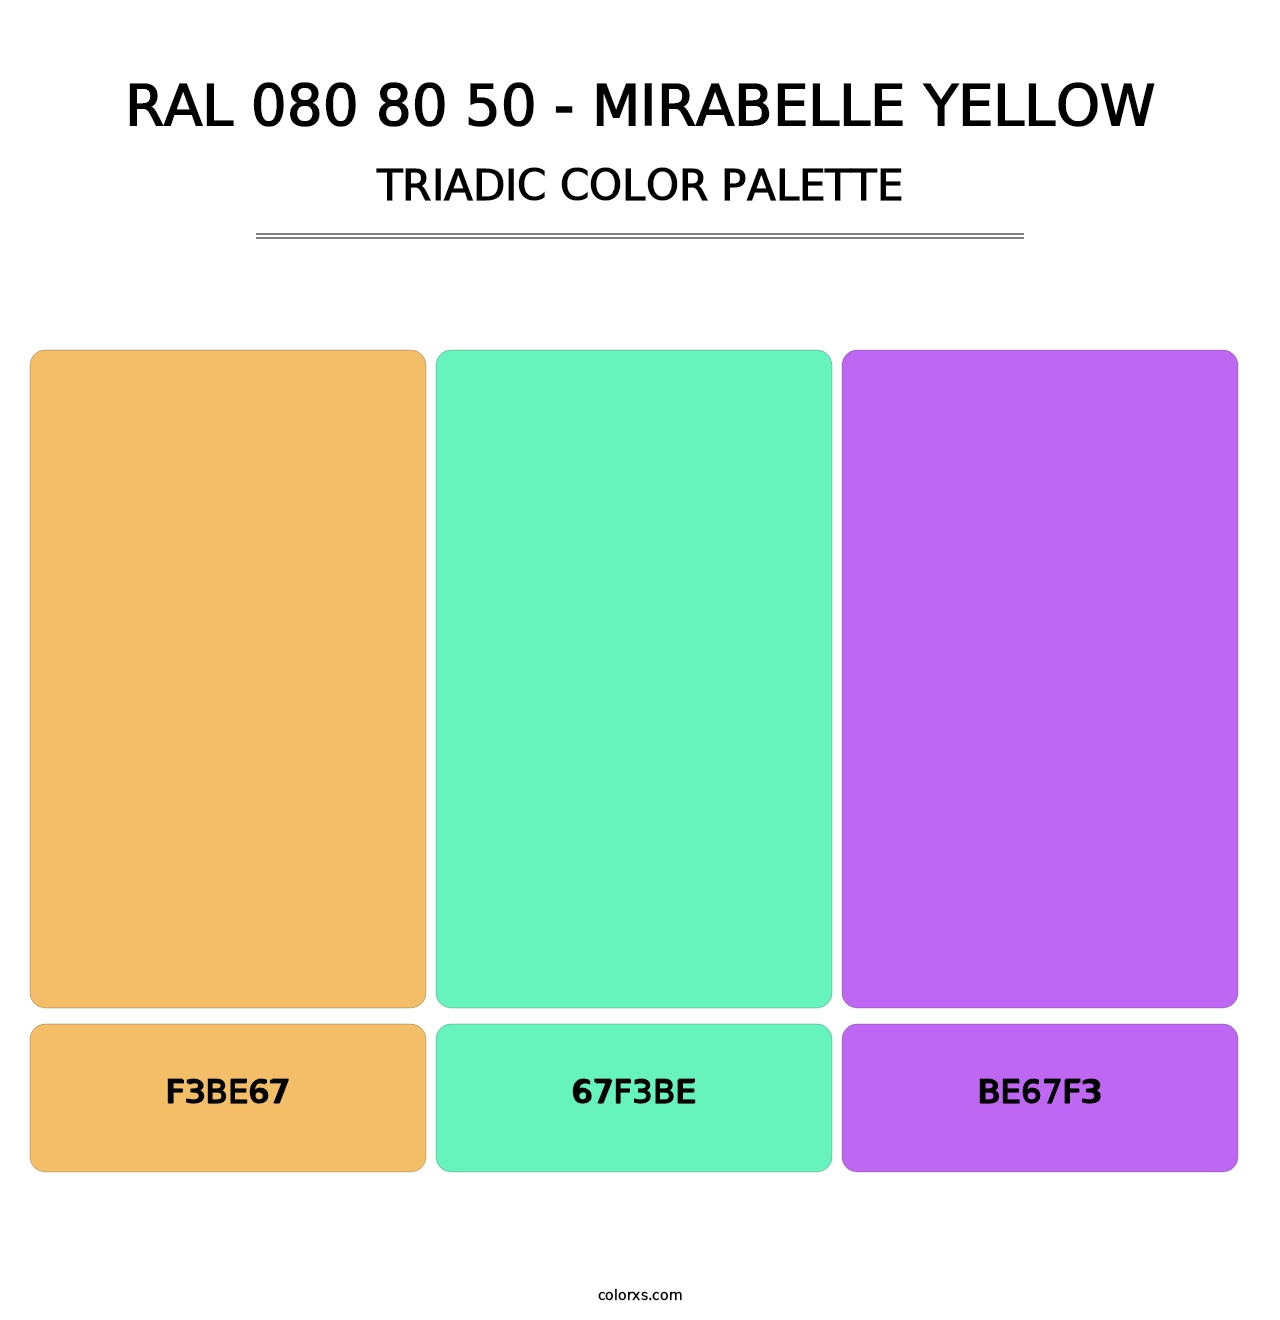 RAL 080 80 50 - Mirabelle Yellow - Triadic Color Palette